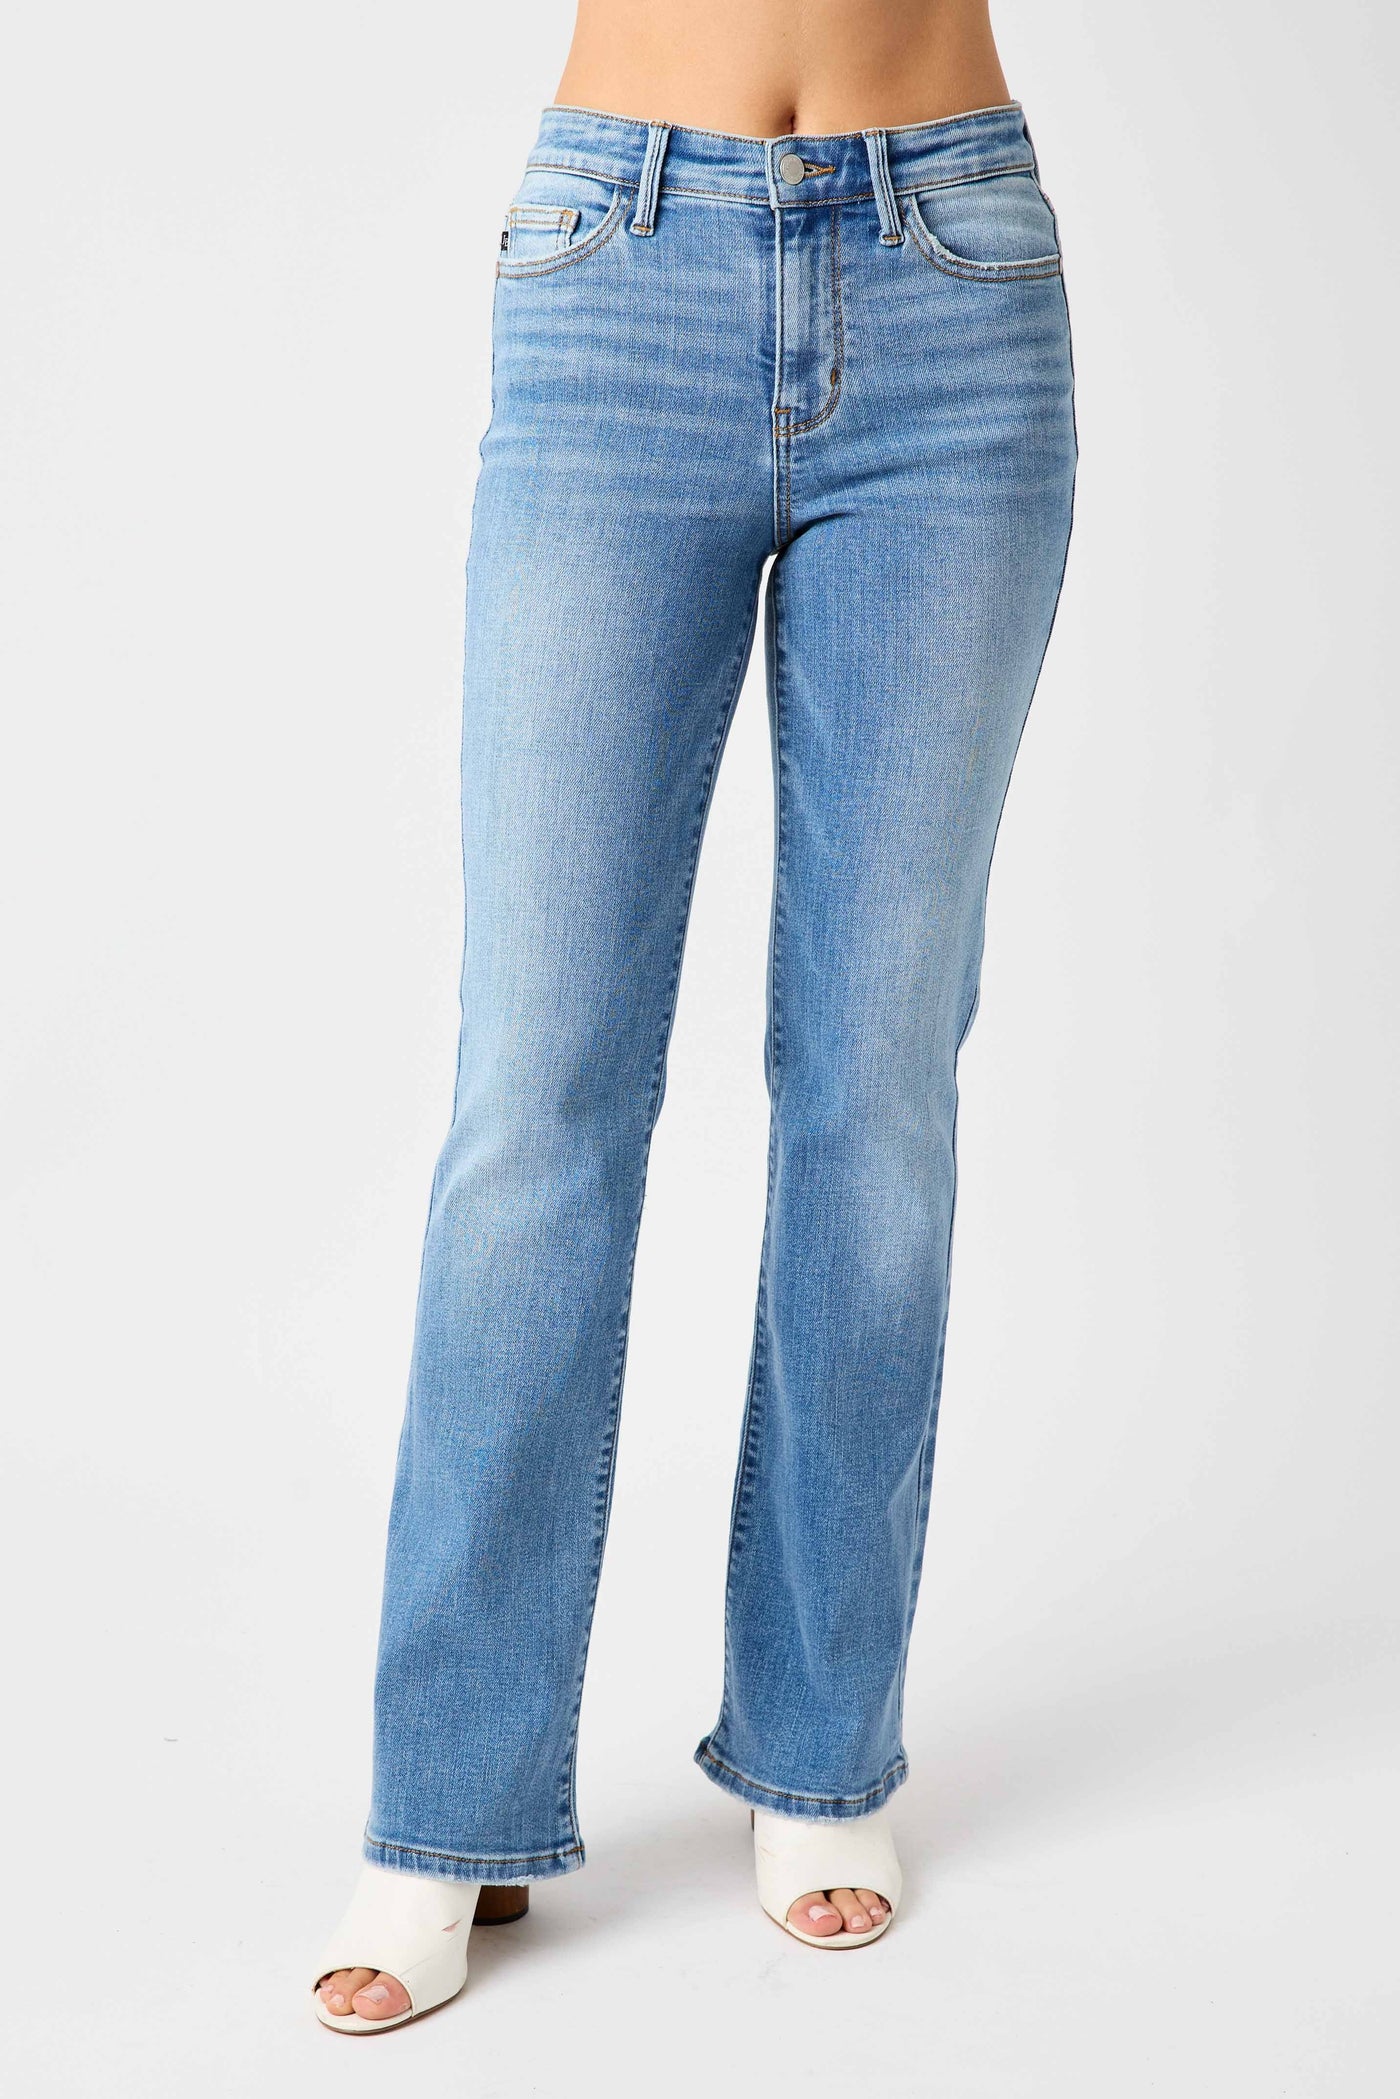 Judy Blue Mid Rise Bootcut Jeans